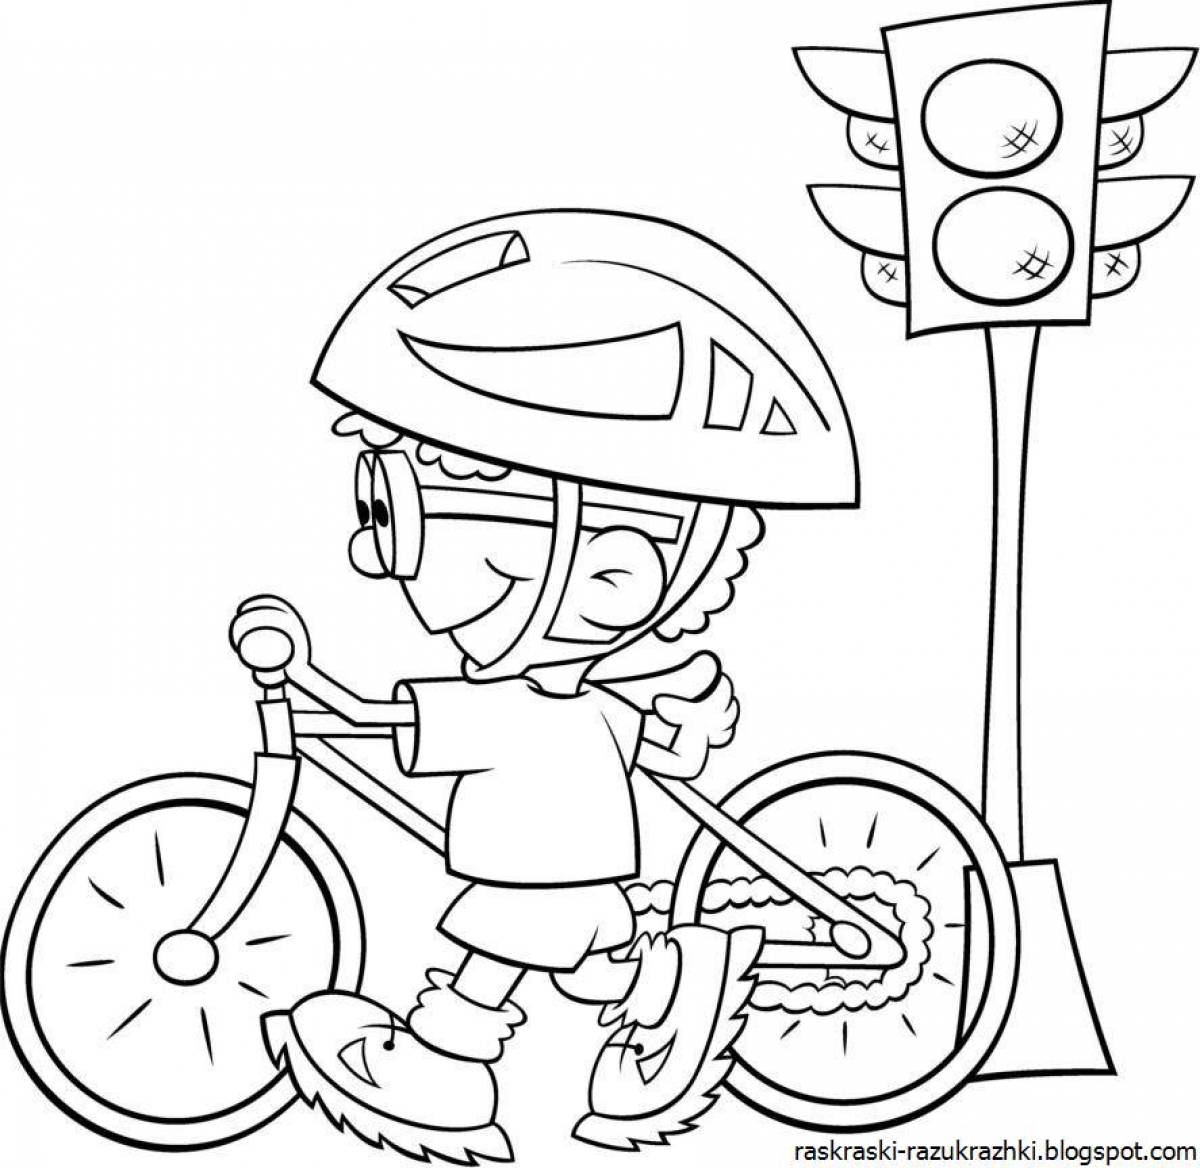 Creative traffic rules coloring pages for preschoolers